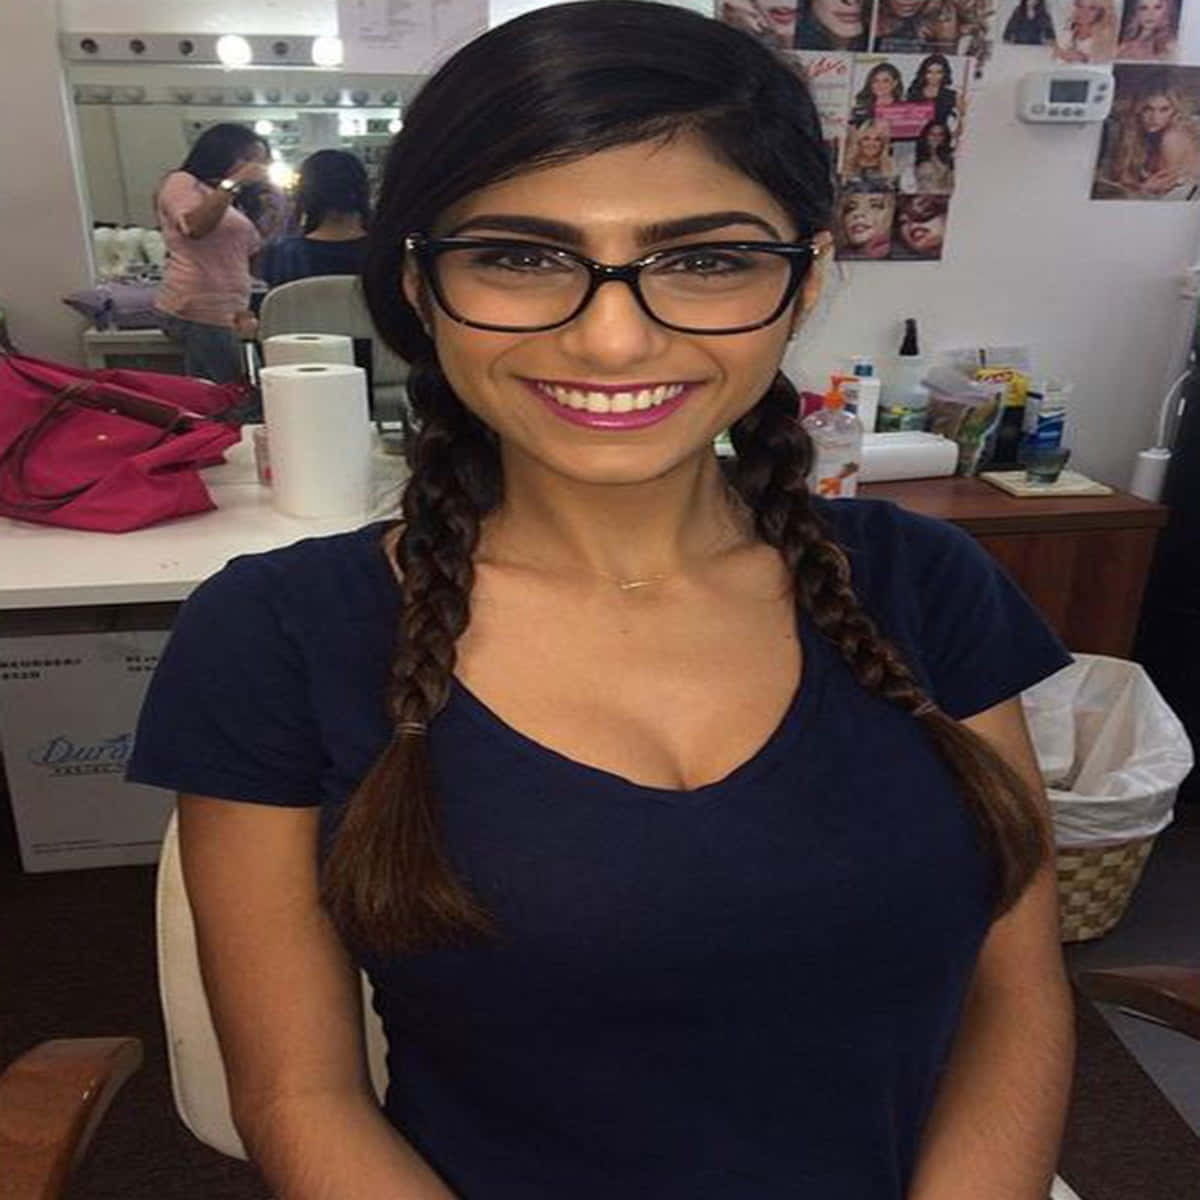 A Woman In Glasses Is Smiling In A Salon